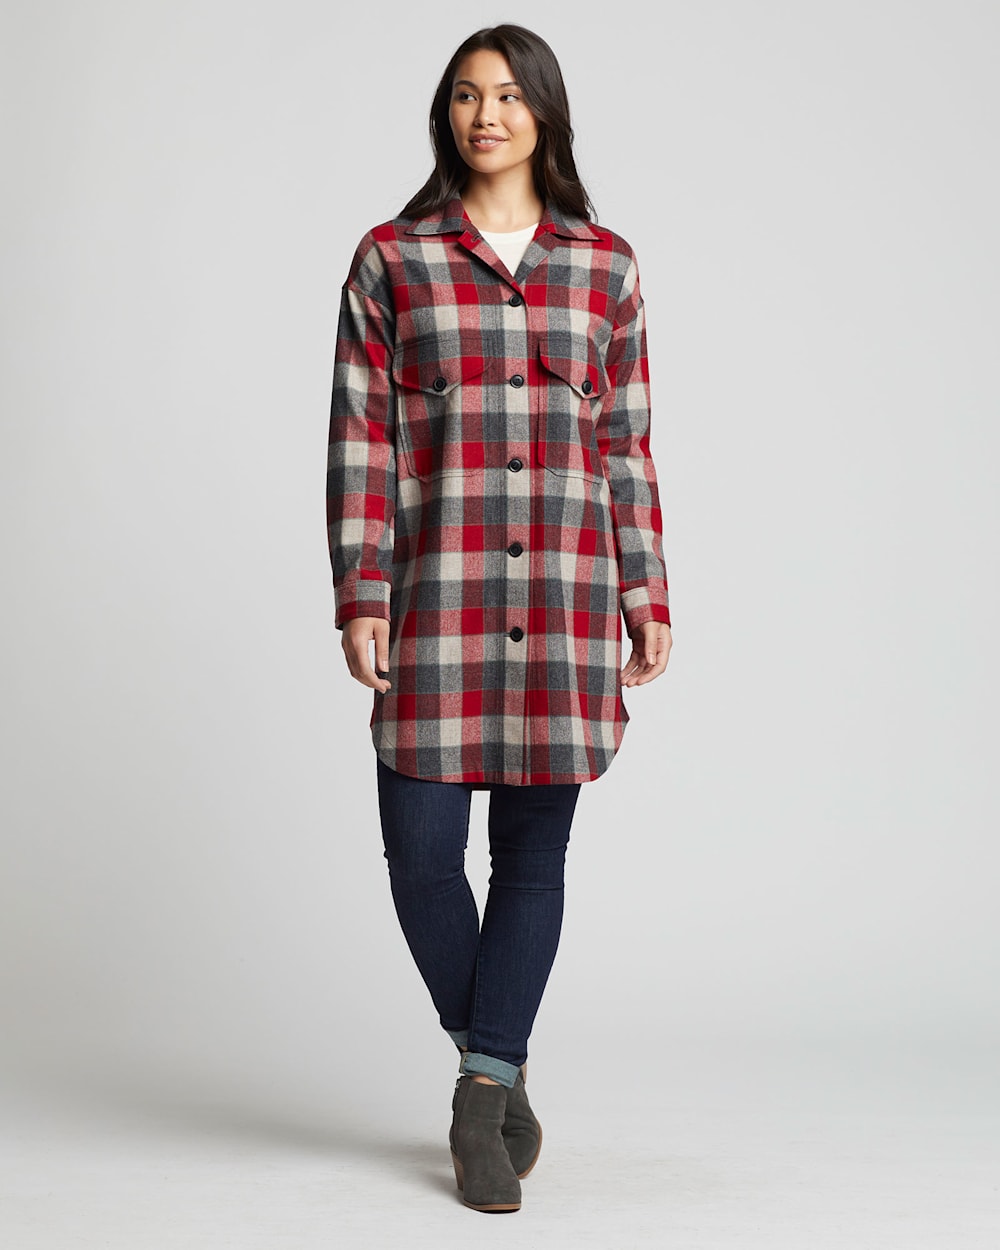 ALTERNATE VIEW OF WOMEN'S OVERSIZED WOOL SHIRT IN RED/TAN BLOCK PLAID image number 5